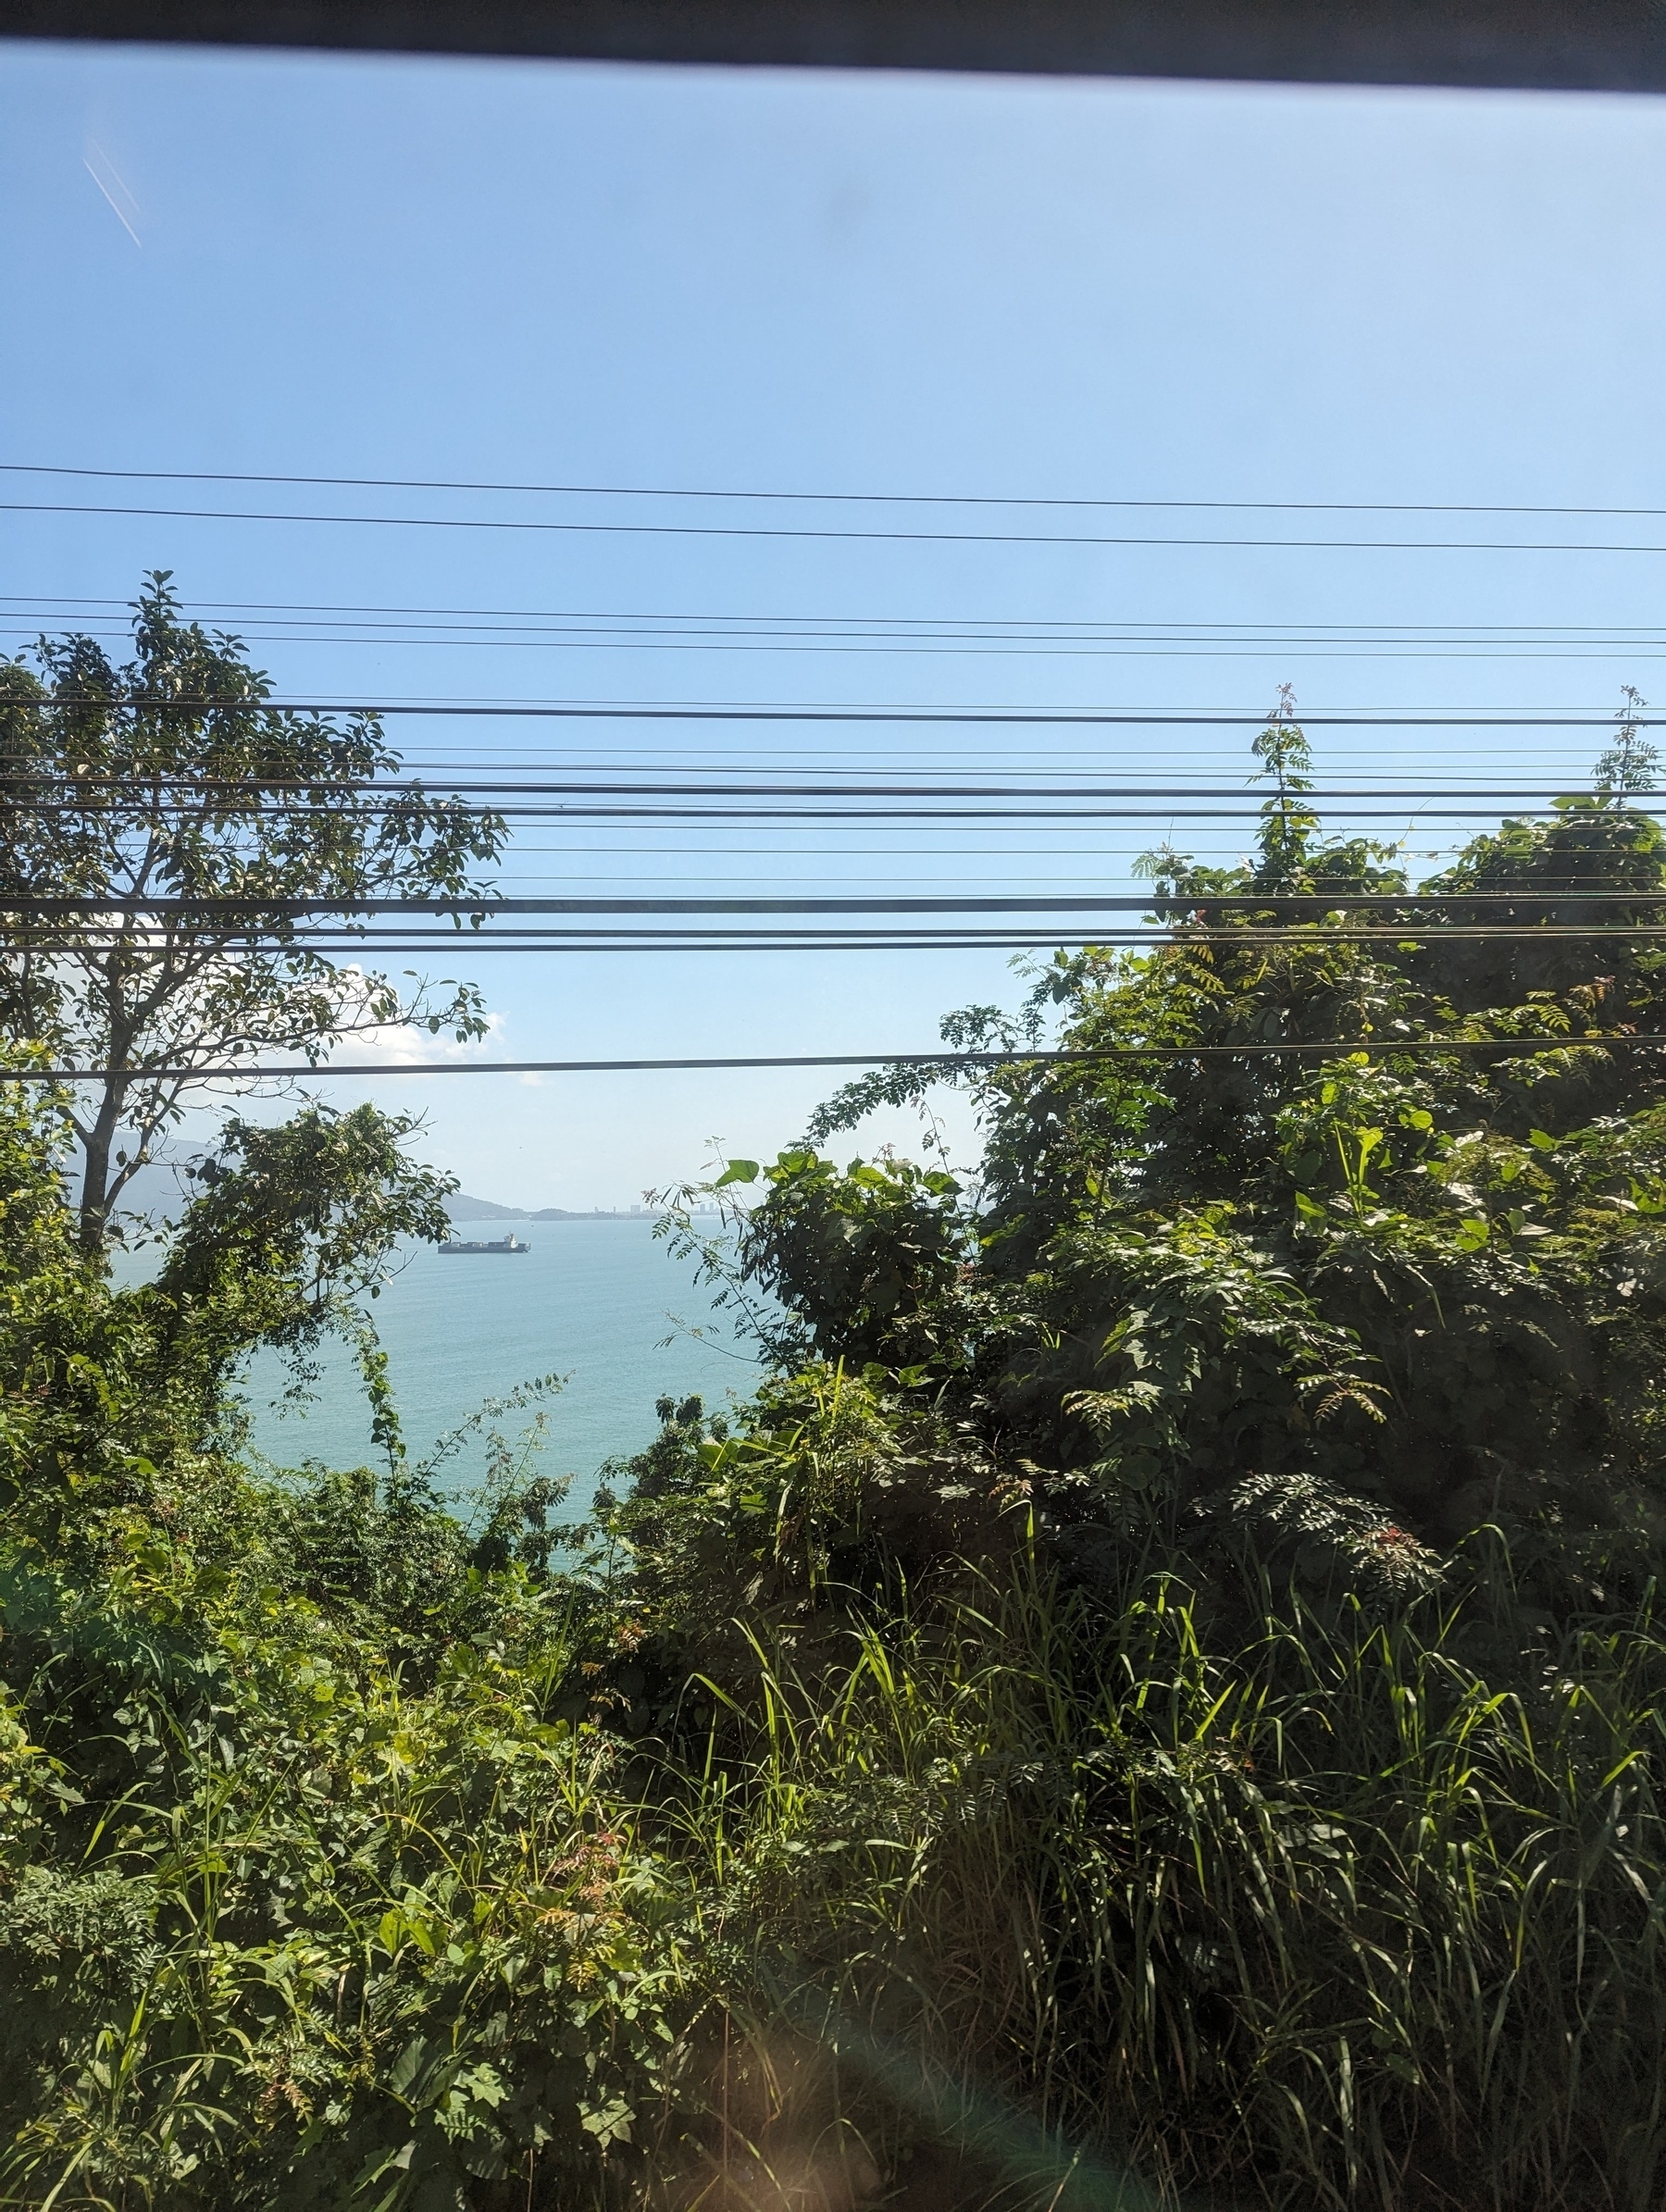 The sea shot from above through trees, or, from the railway tracks. There's a ship floating around and cables near the line 